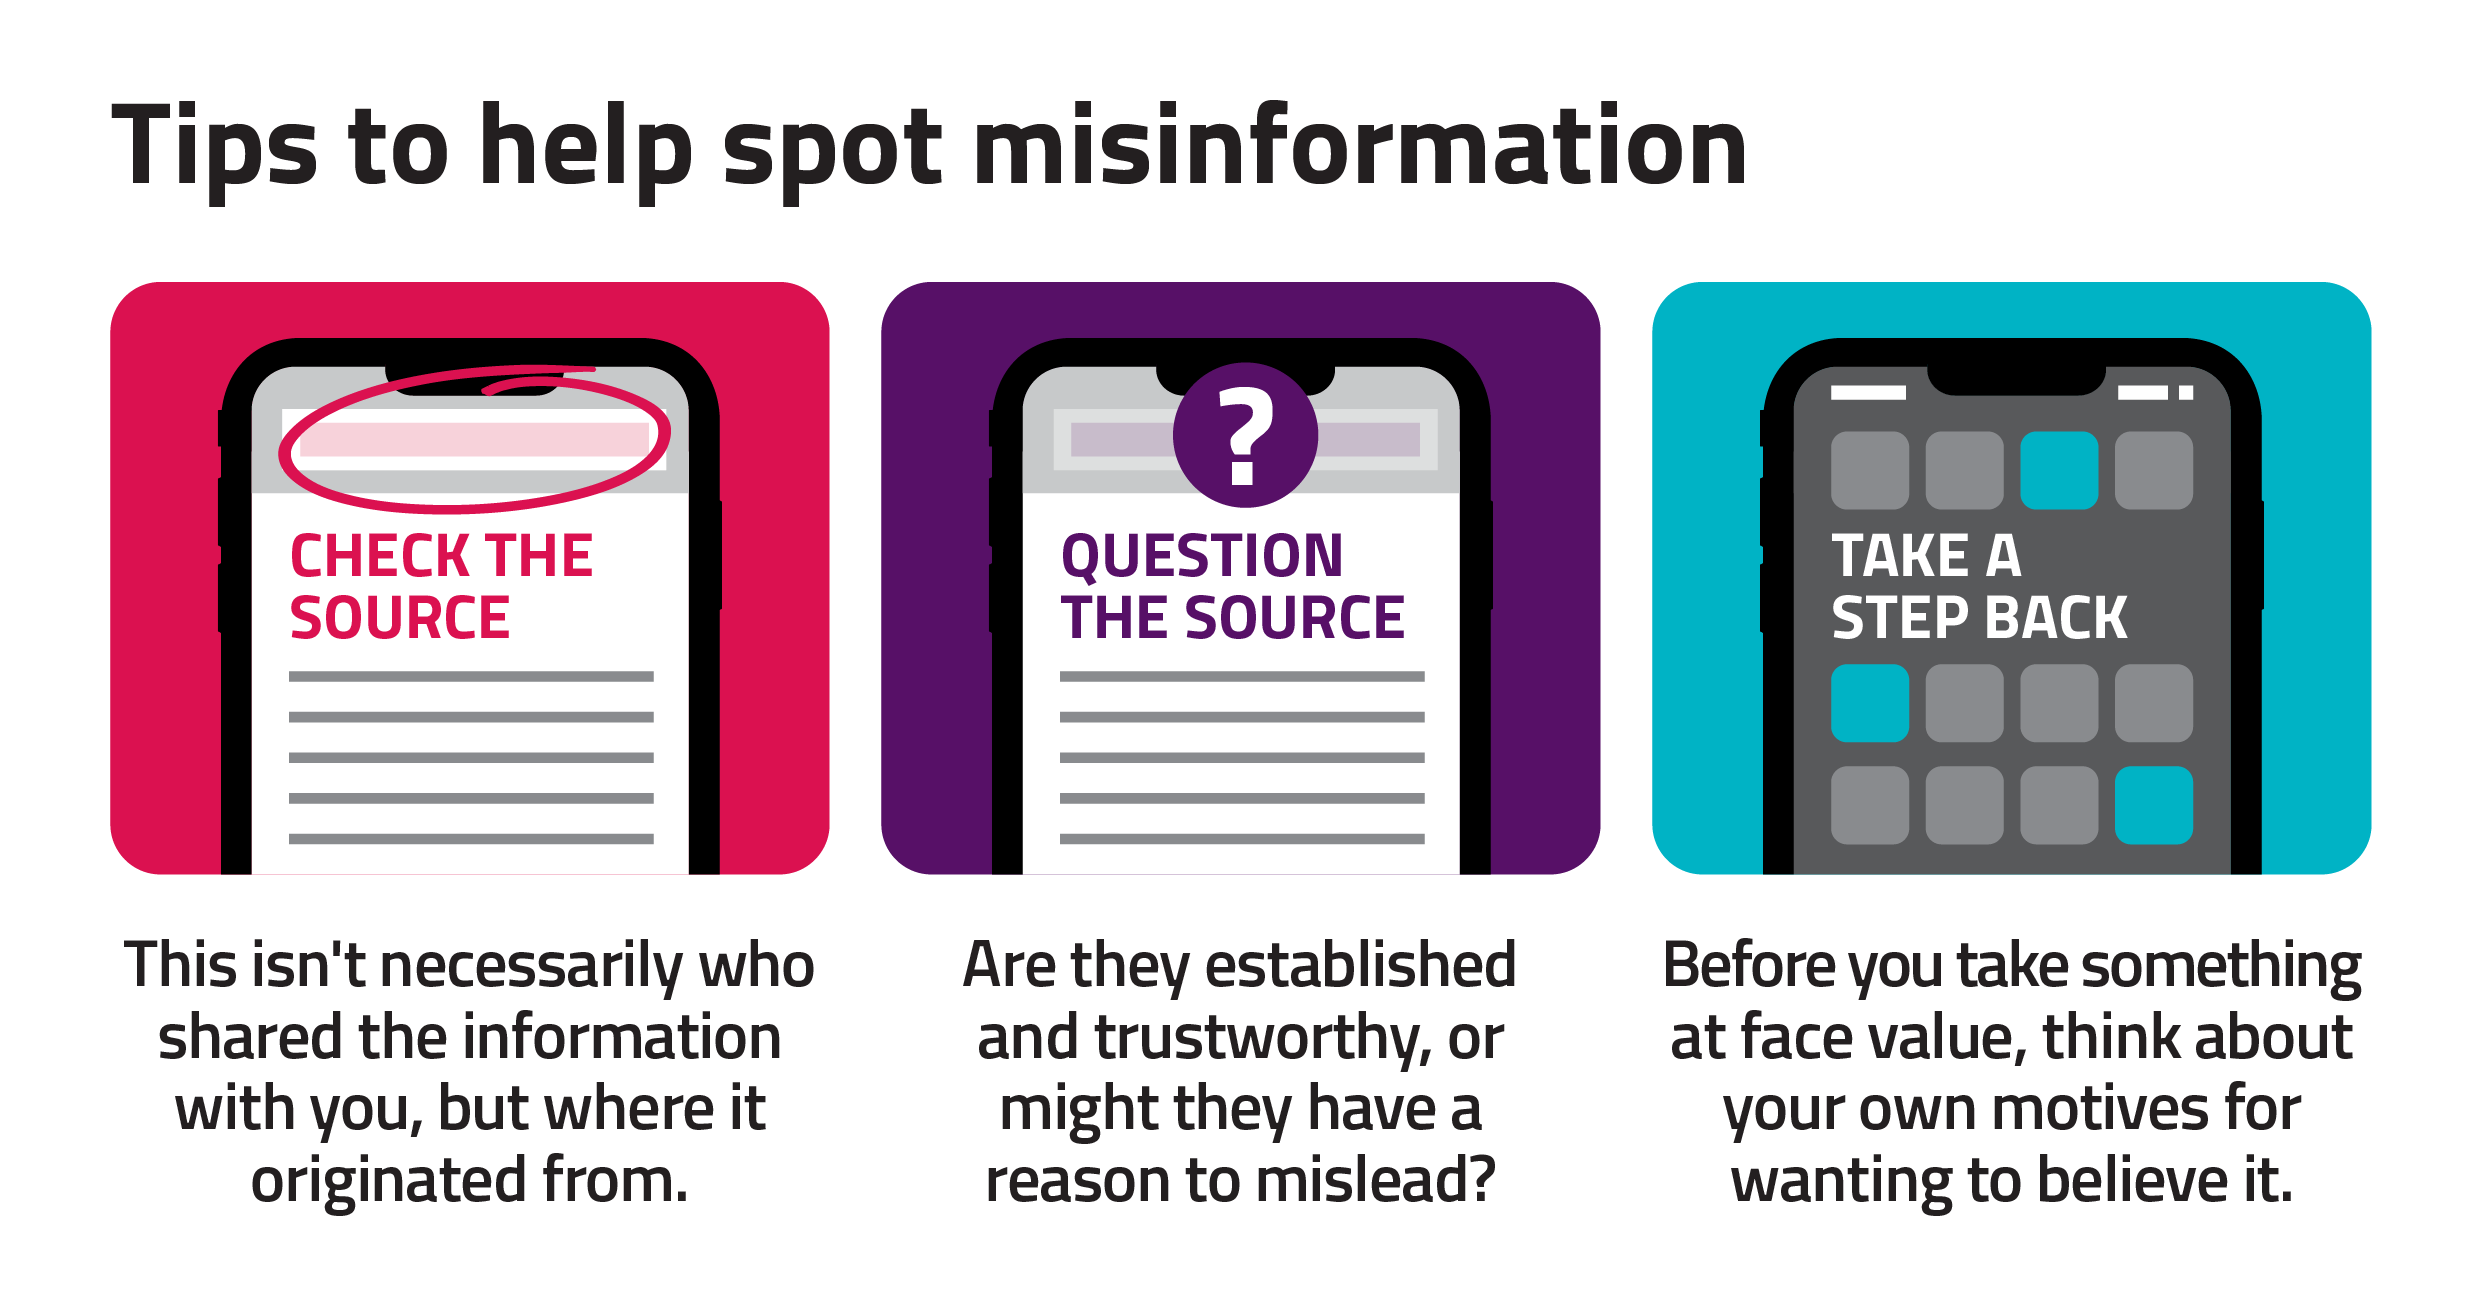 To help spot misinformation, always check the source. Question it: are they established and trustworthy? Take a step back and think about your own motives for believing something before you take it at face value.